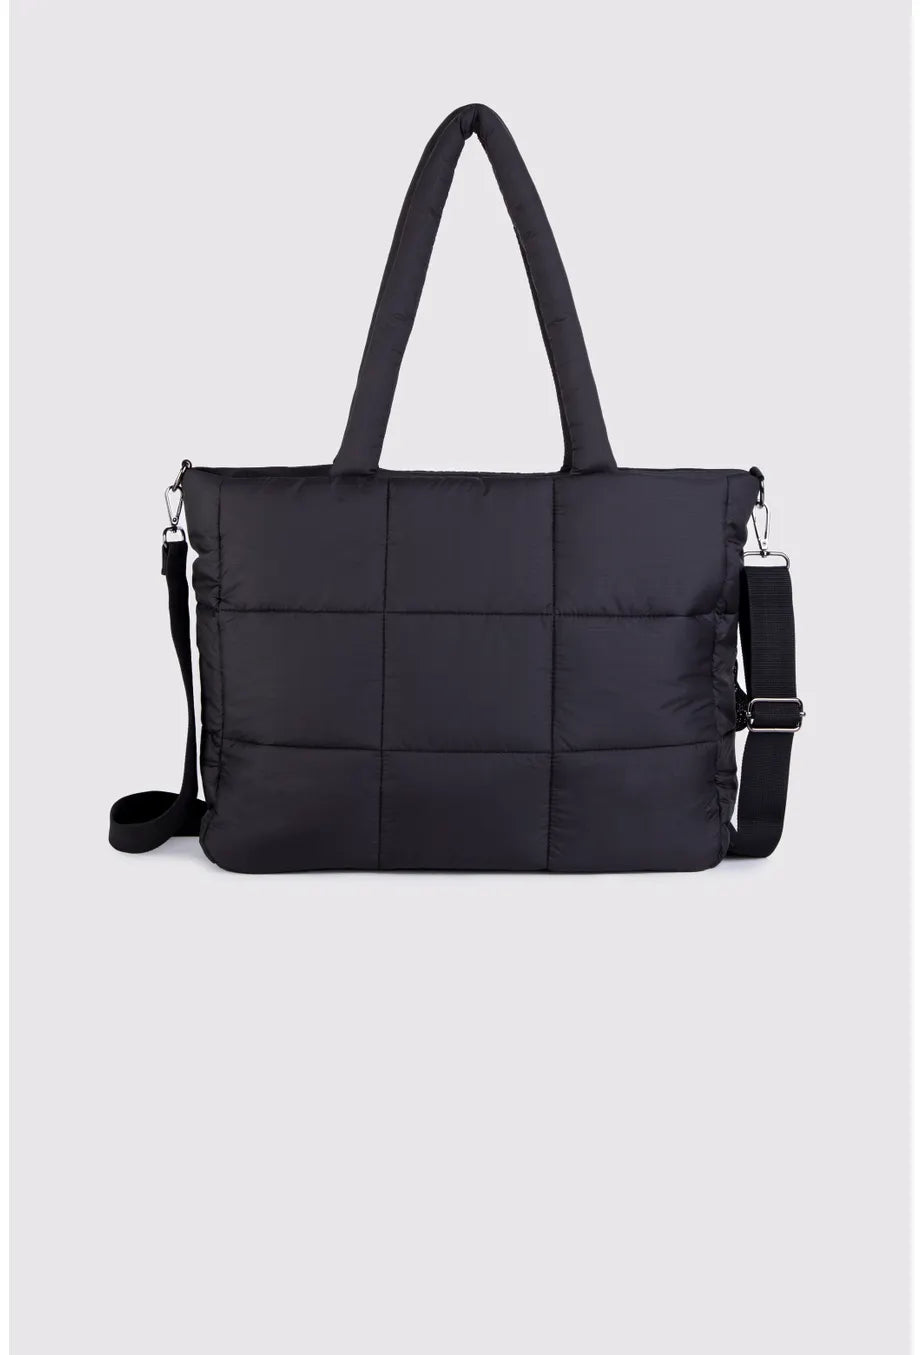 Bolso Mujer Tote Square Quilted Negro